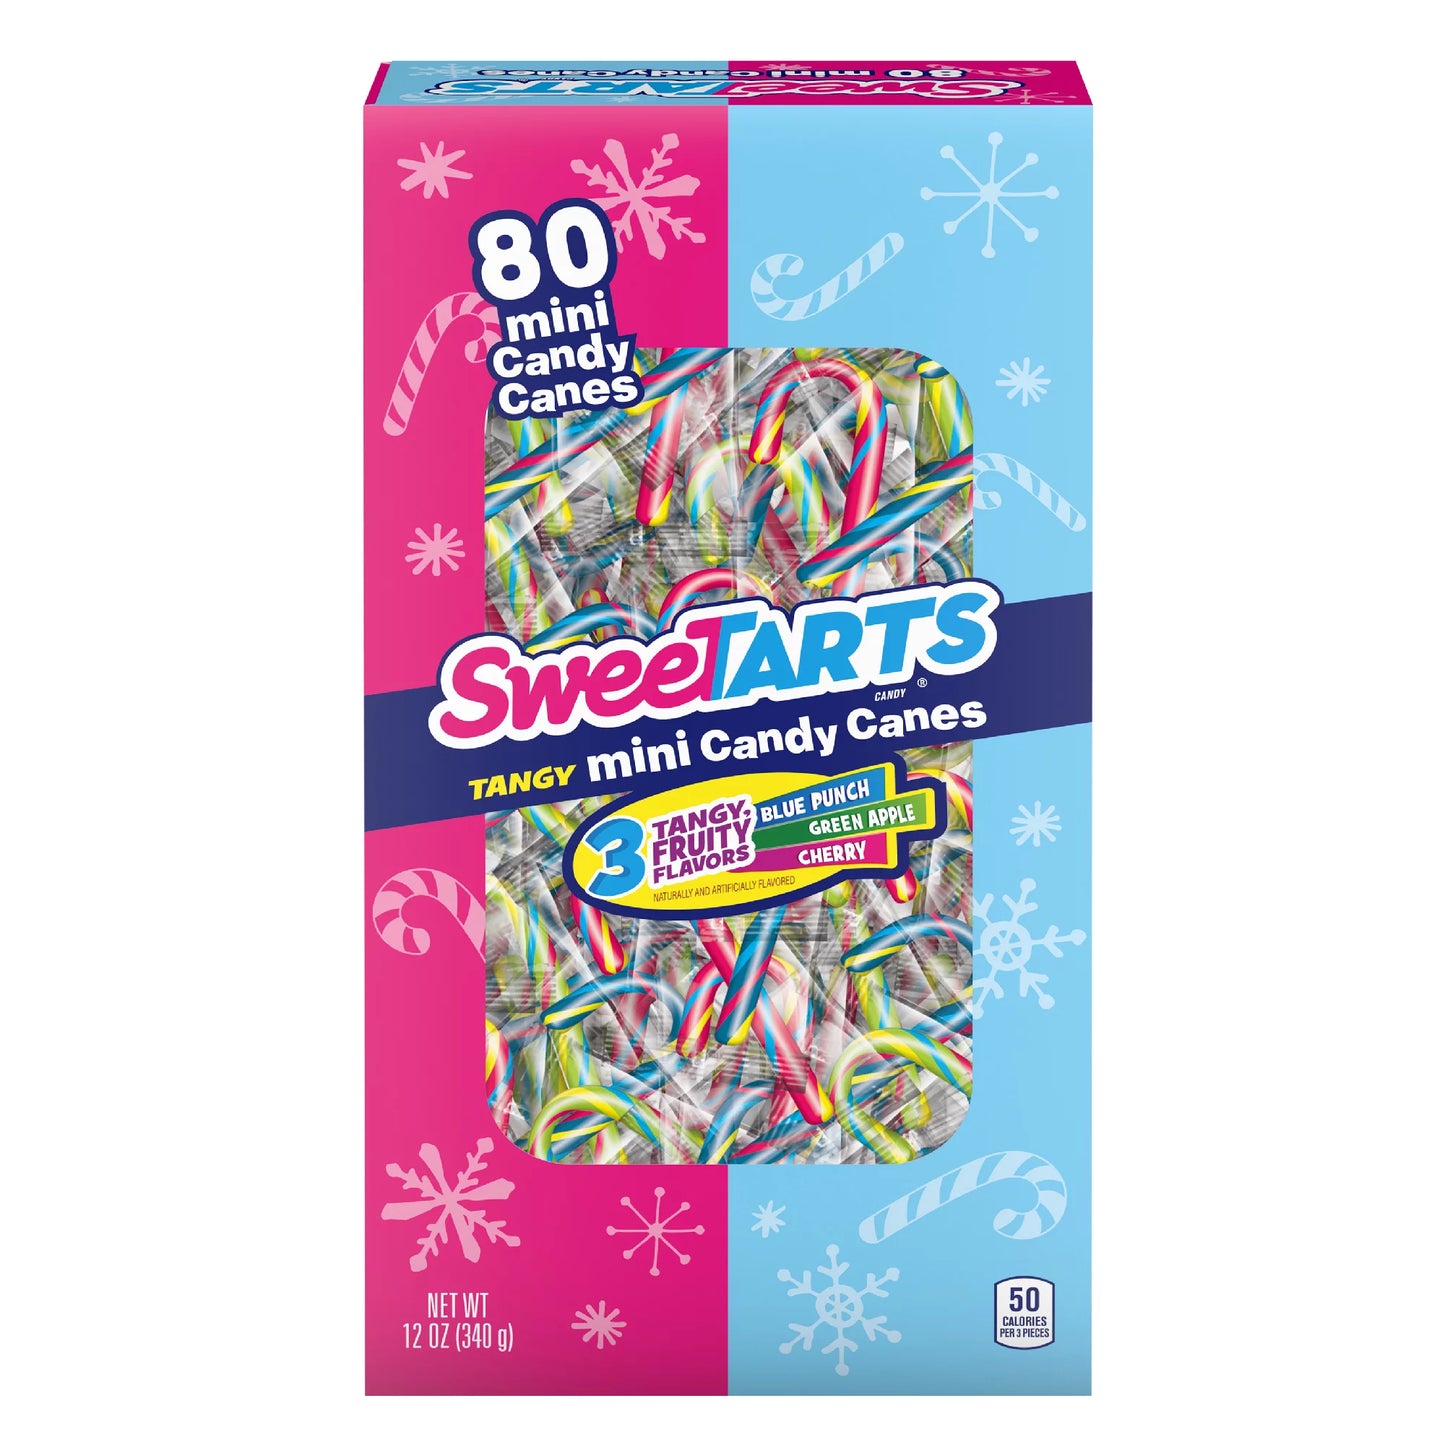 SweeTarts Mini Holiday Candy Canes, Holiday Candy, Christmas Stocking Stuffers for Kids, 32ct, 4.8 oz Box